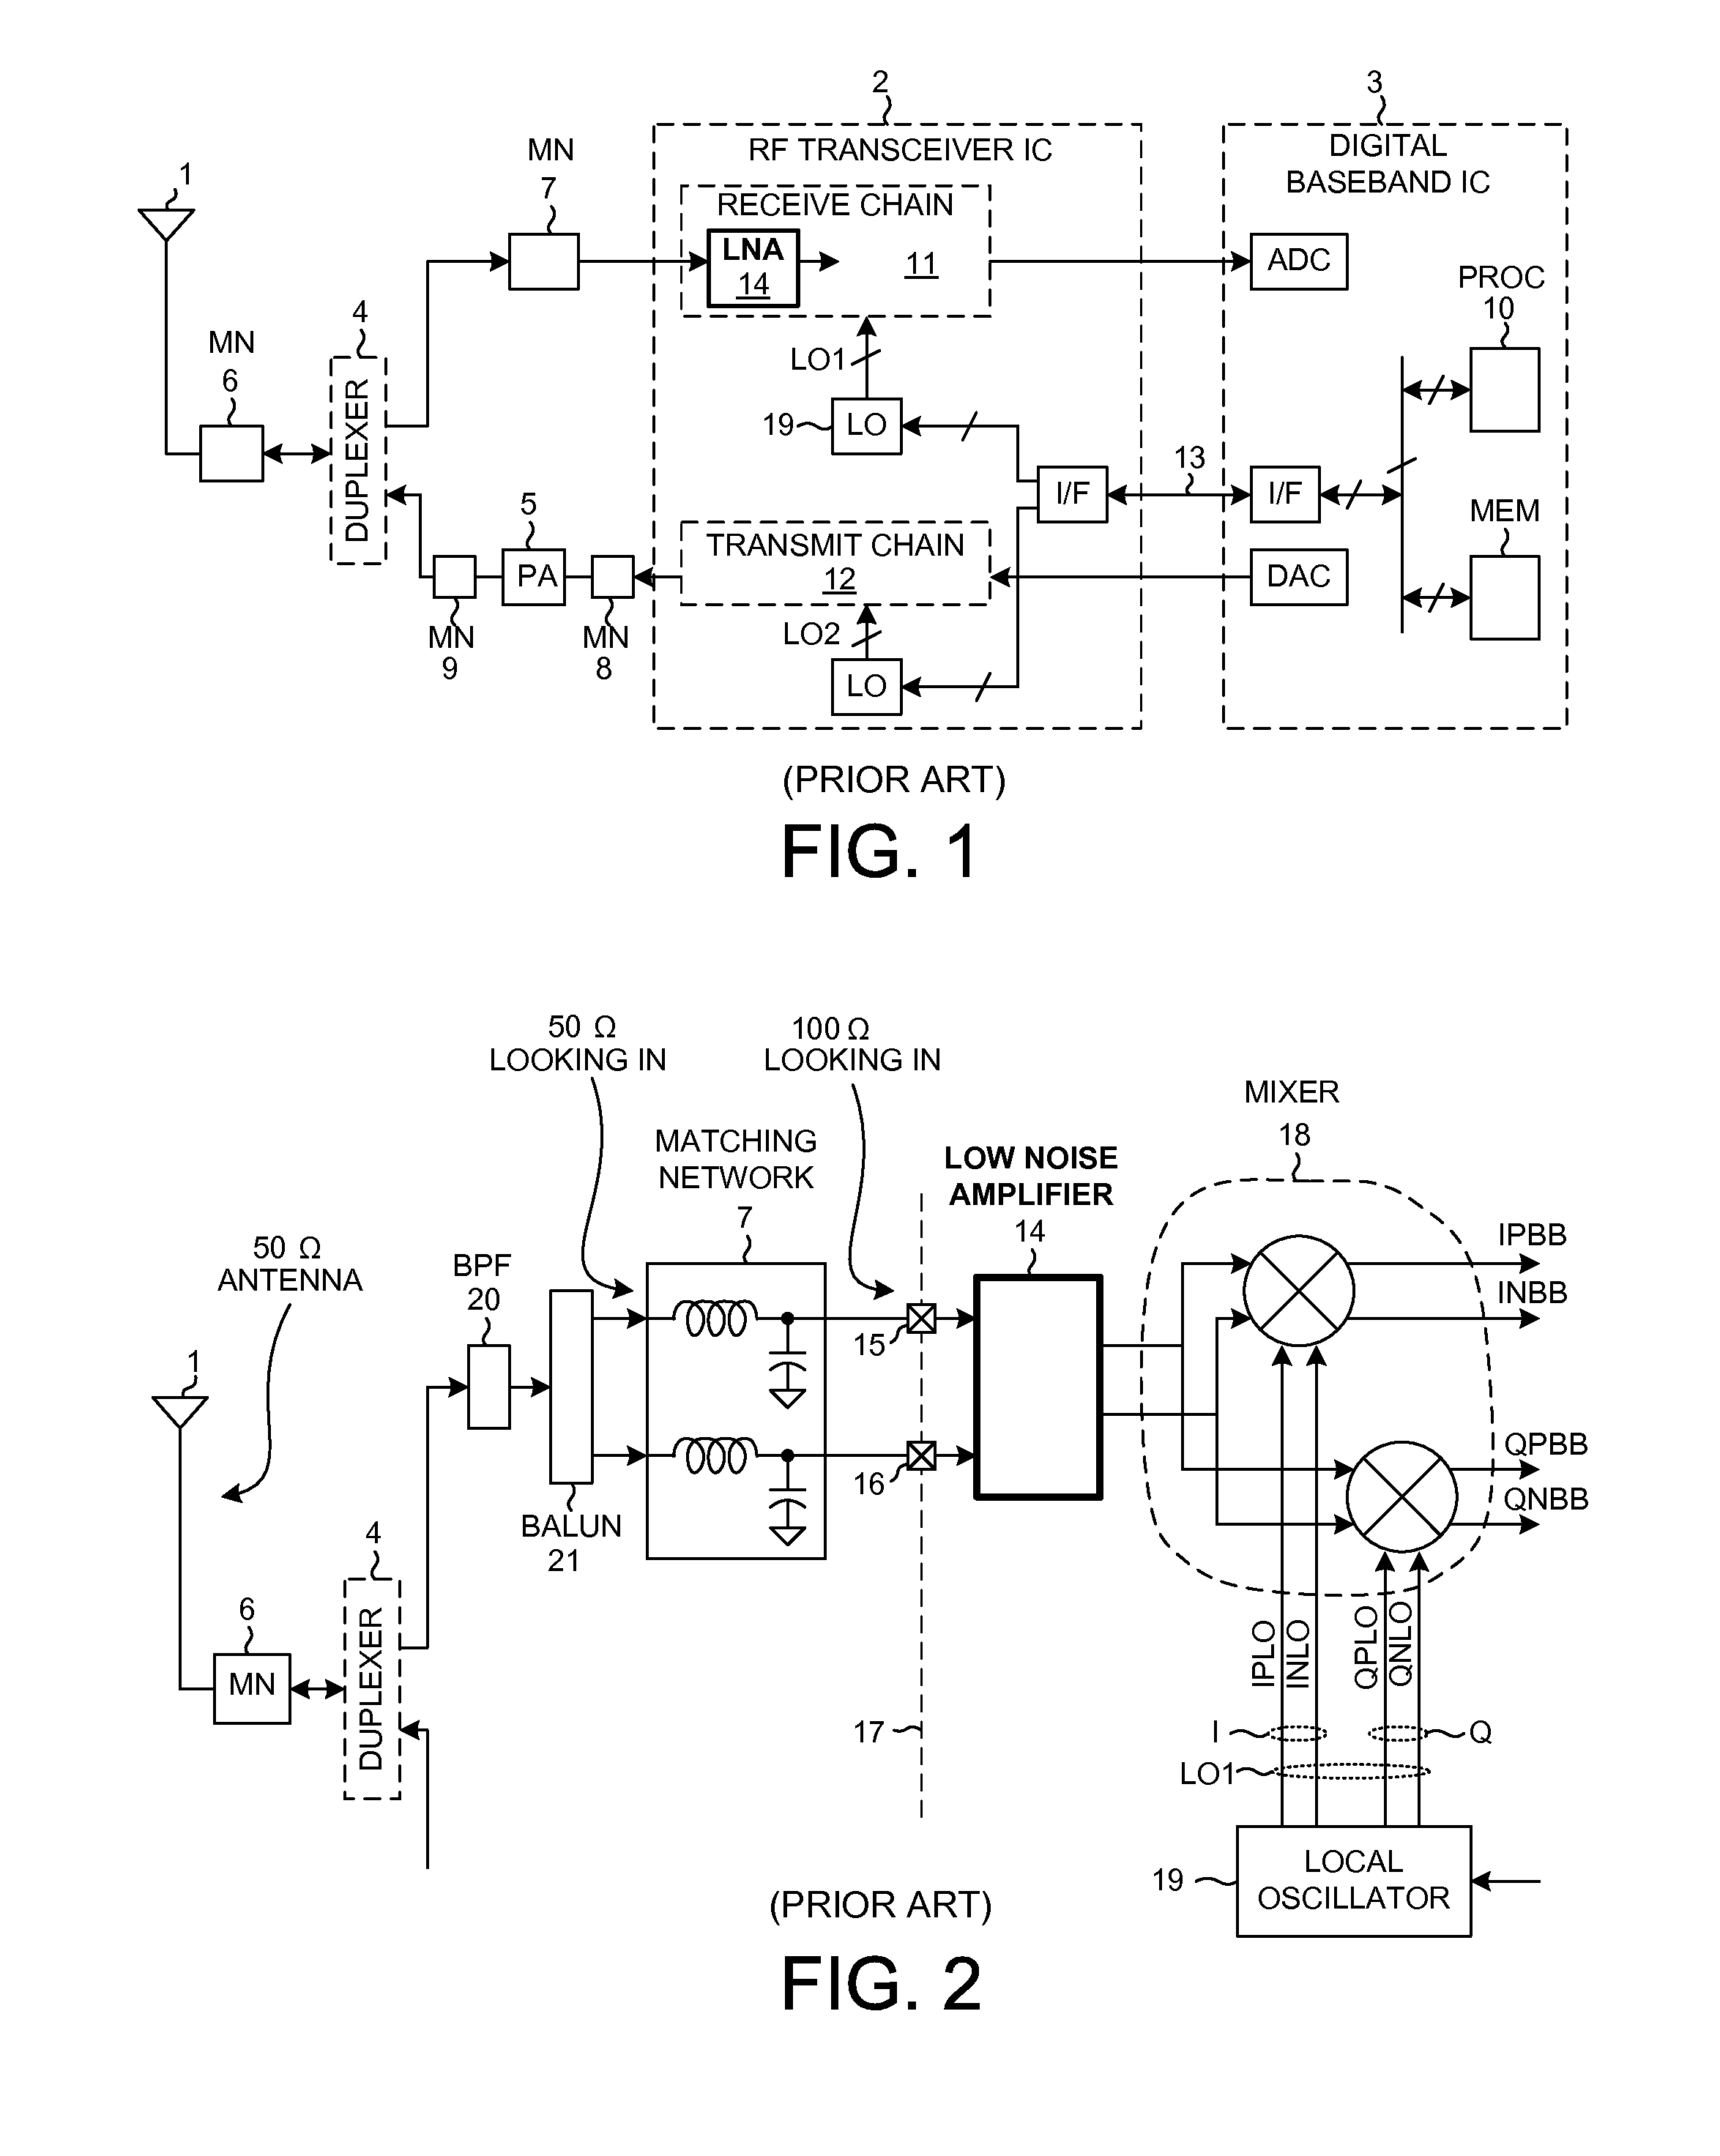 Noise-canceling for differential amplifiers requiring no external matching